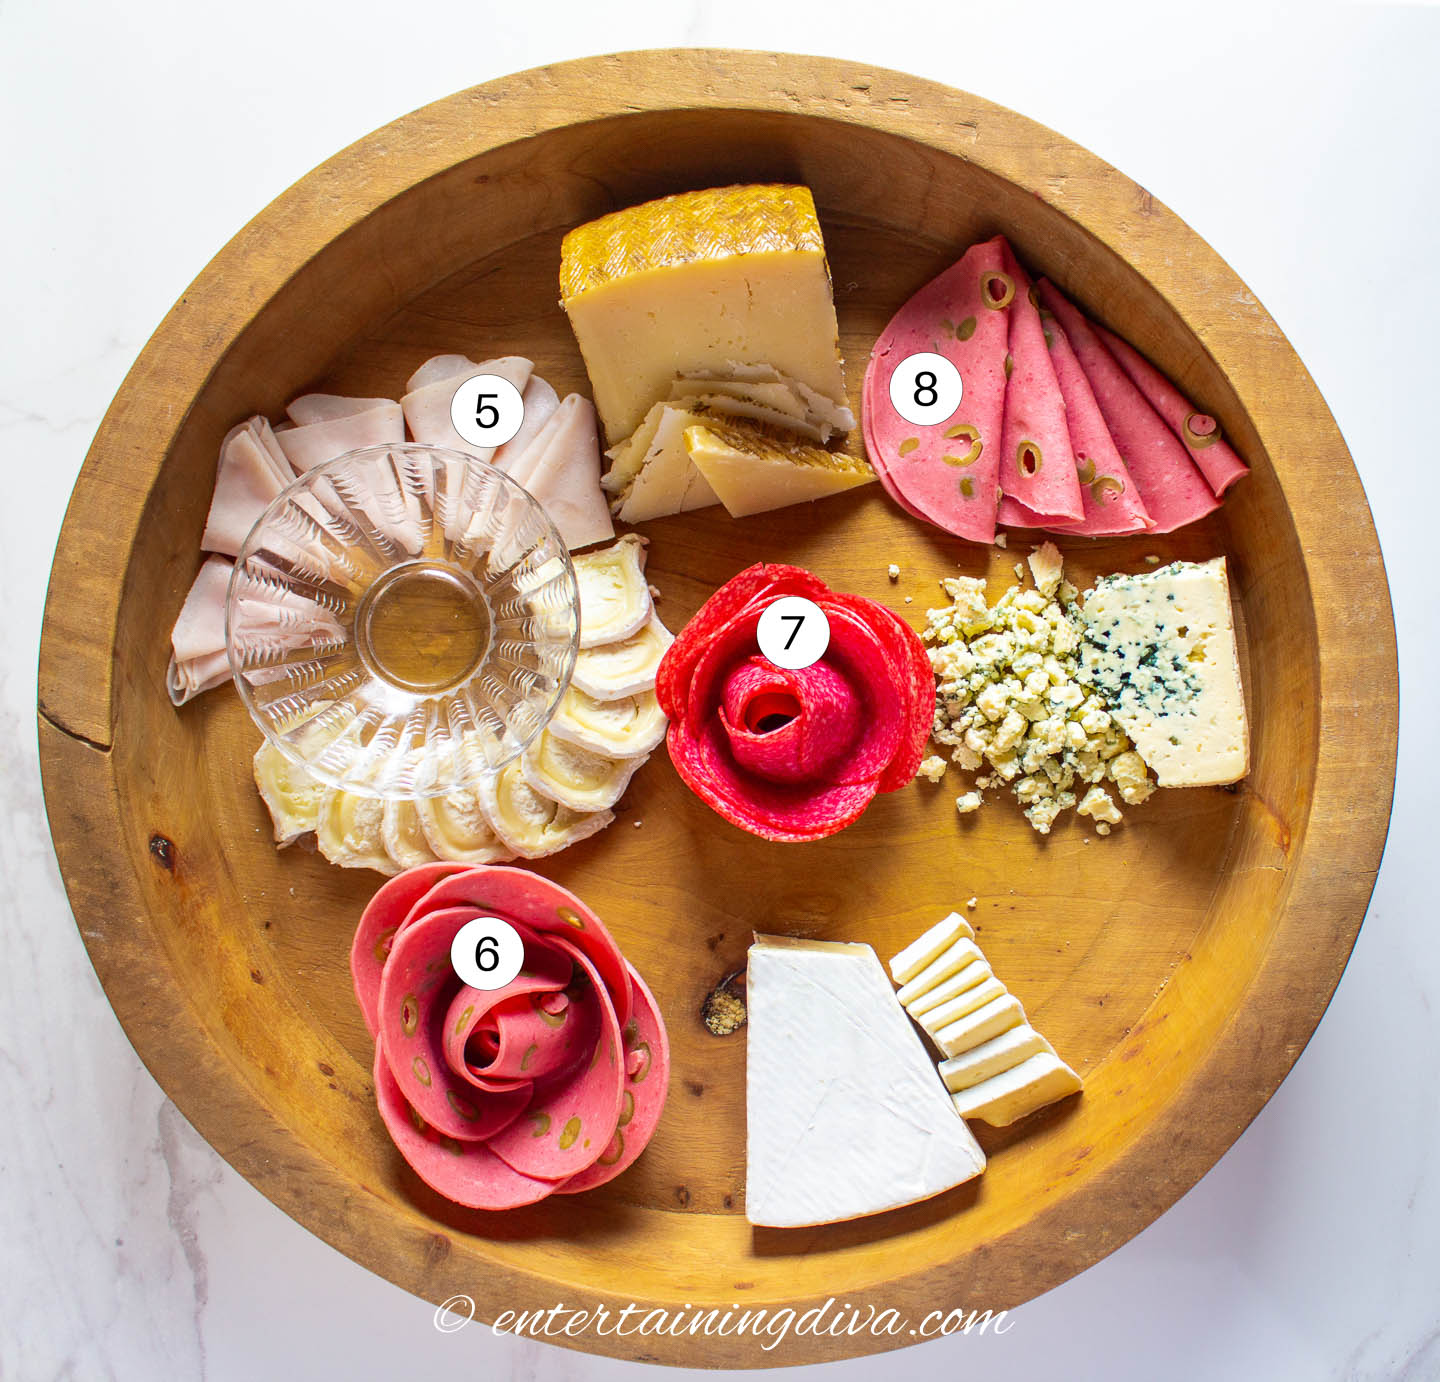 A round charcuterie board with 4 cheeses and ham, salami and mortadella arranged on it